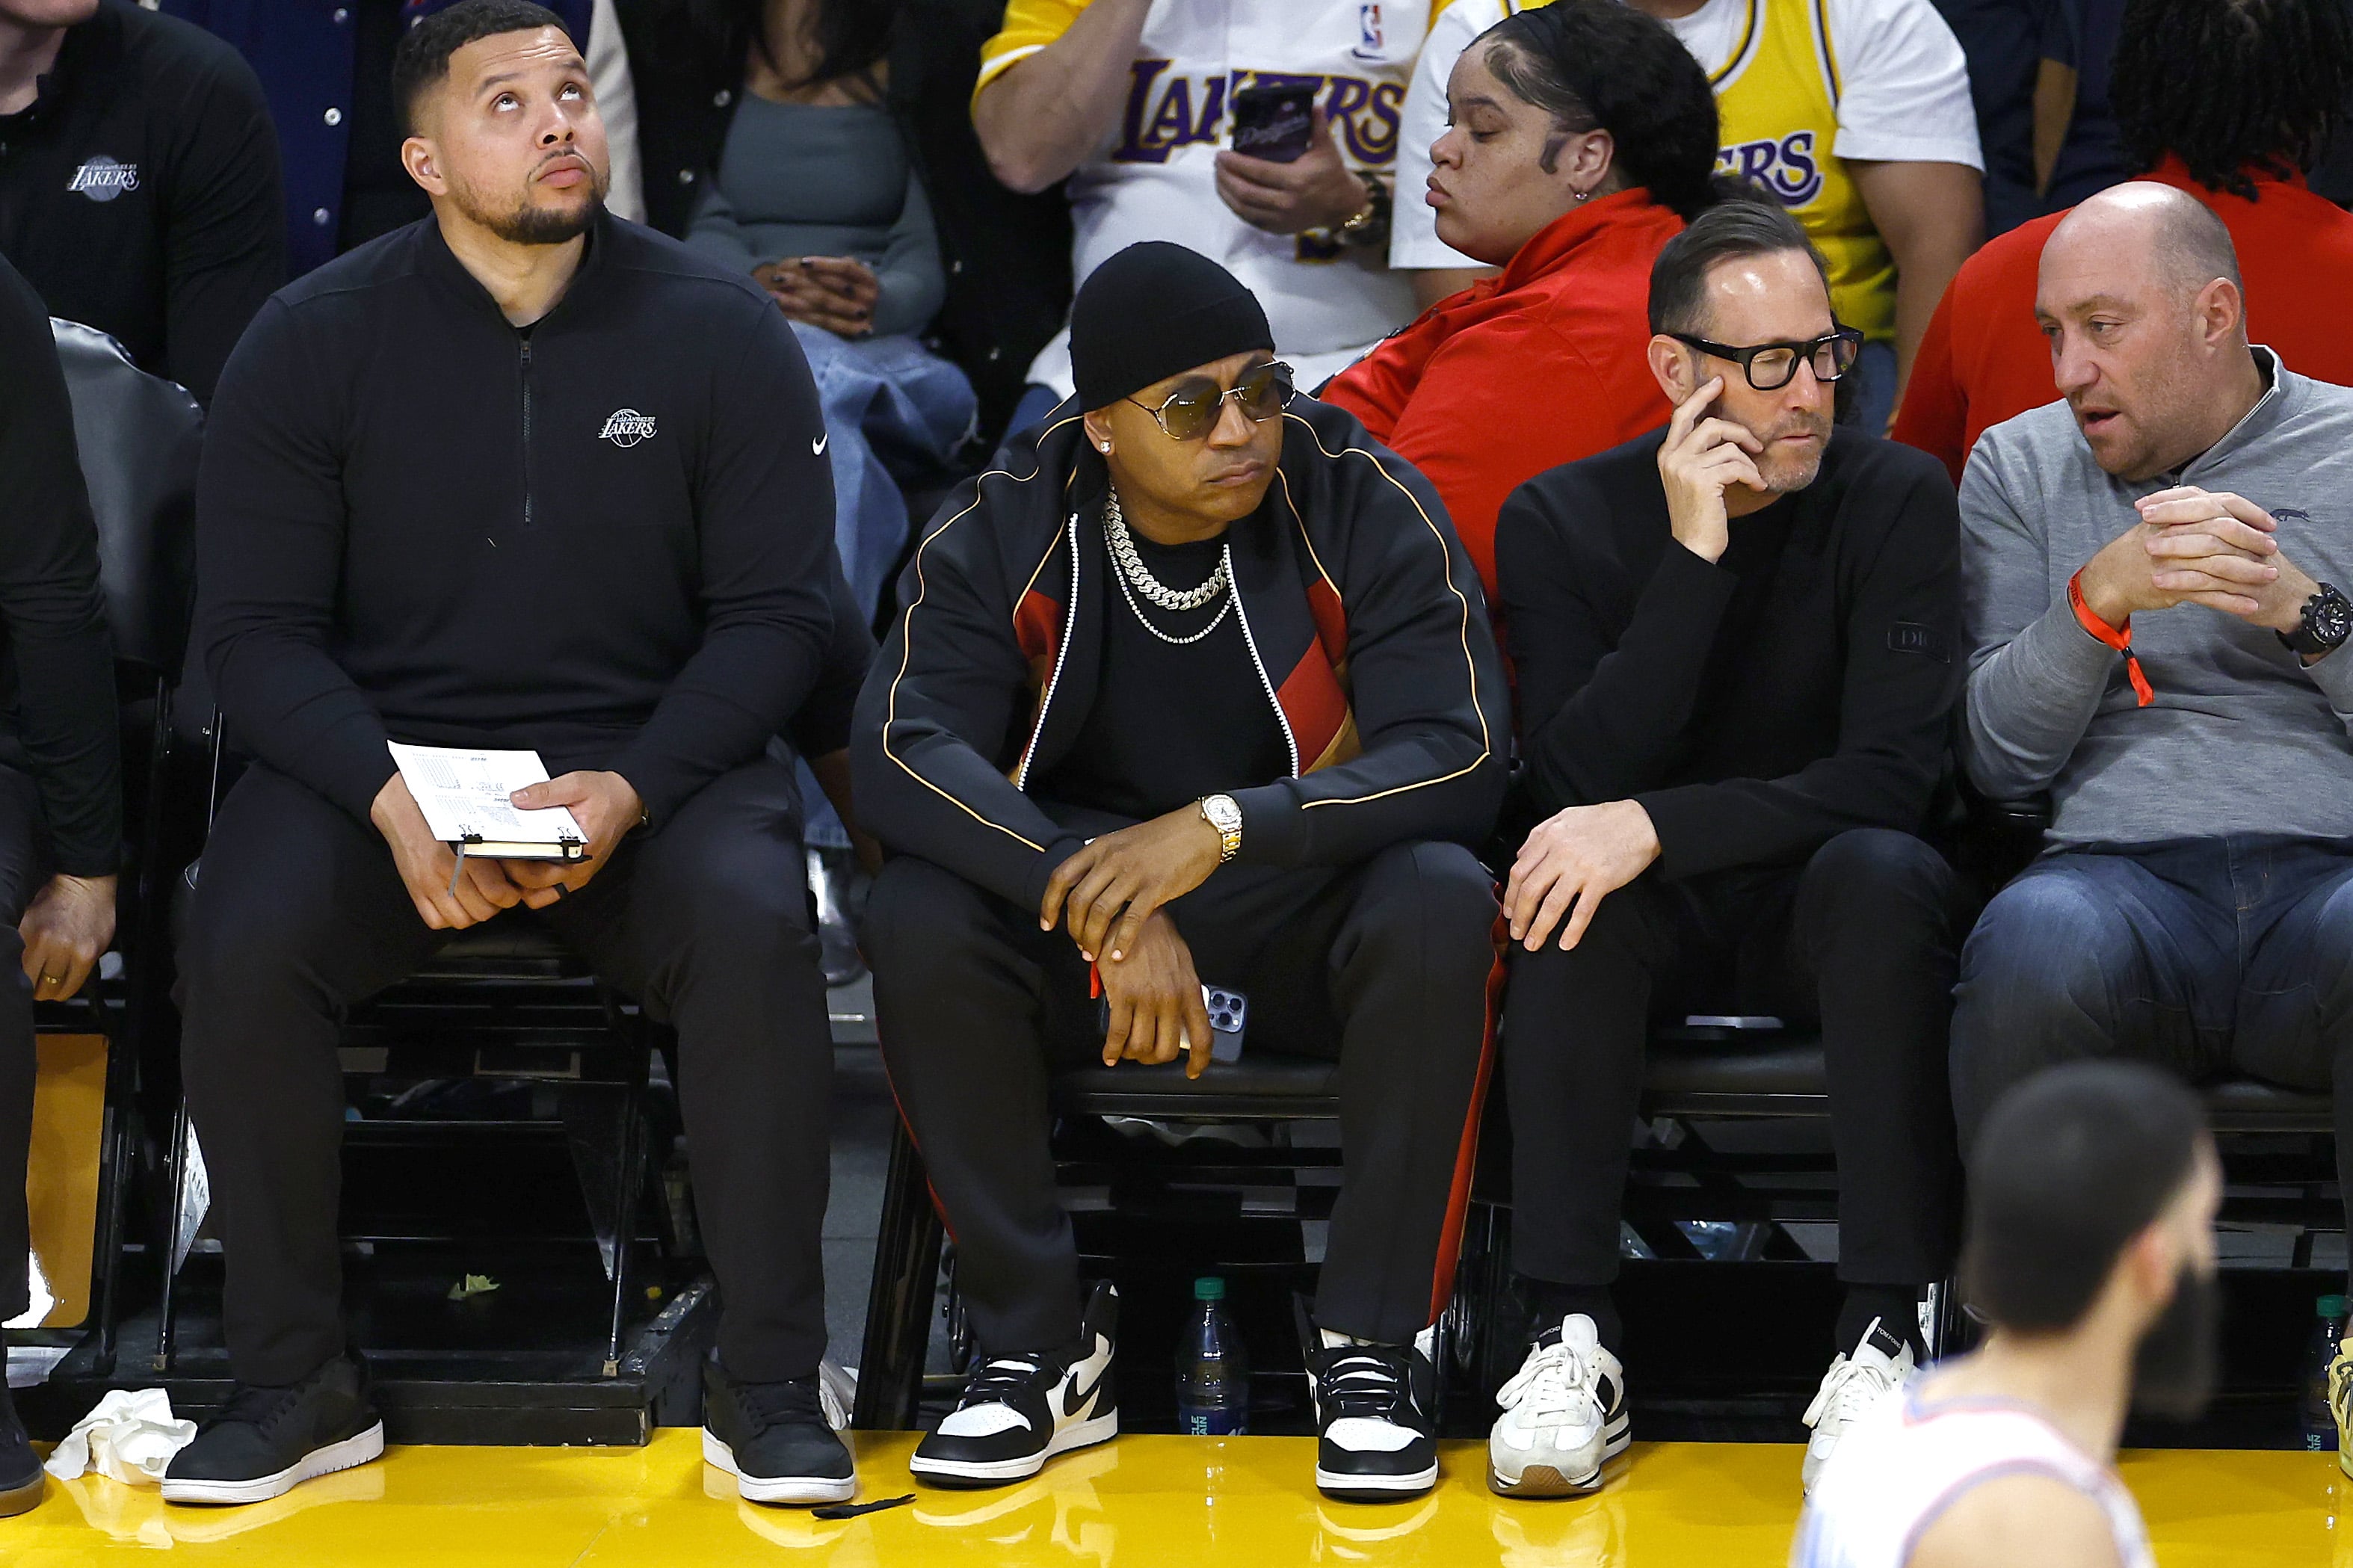 See the Celebs Who Witnessed LeBron James Break NBA's Scoring Record